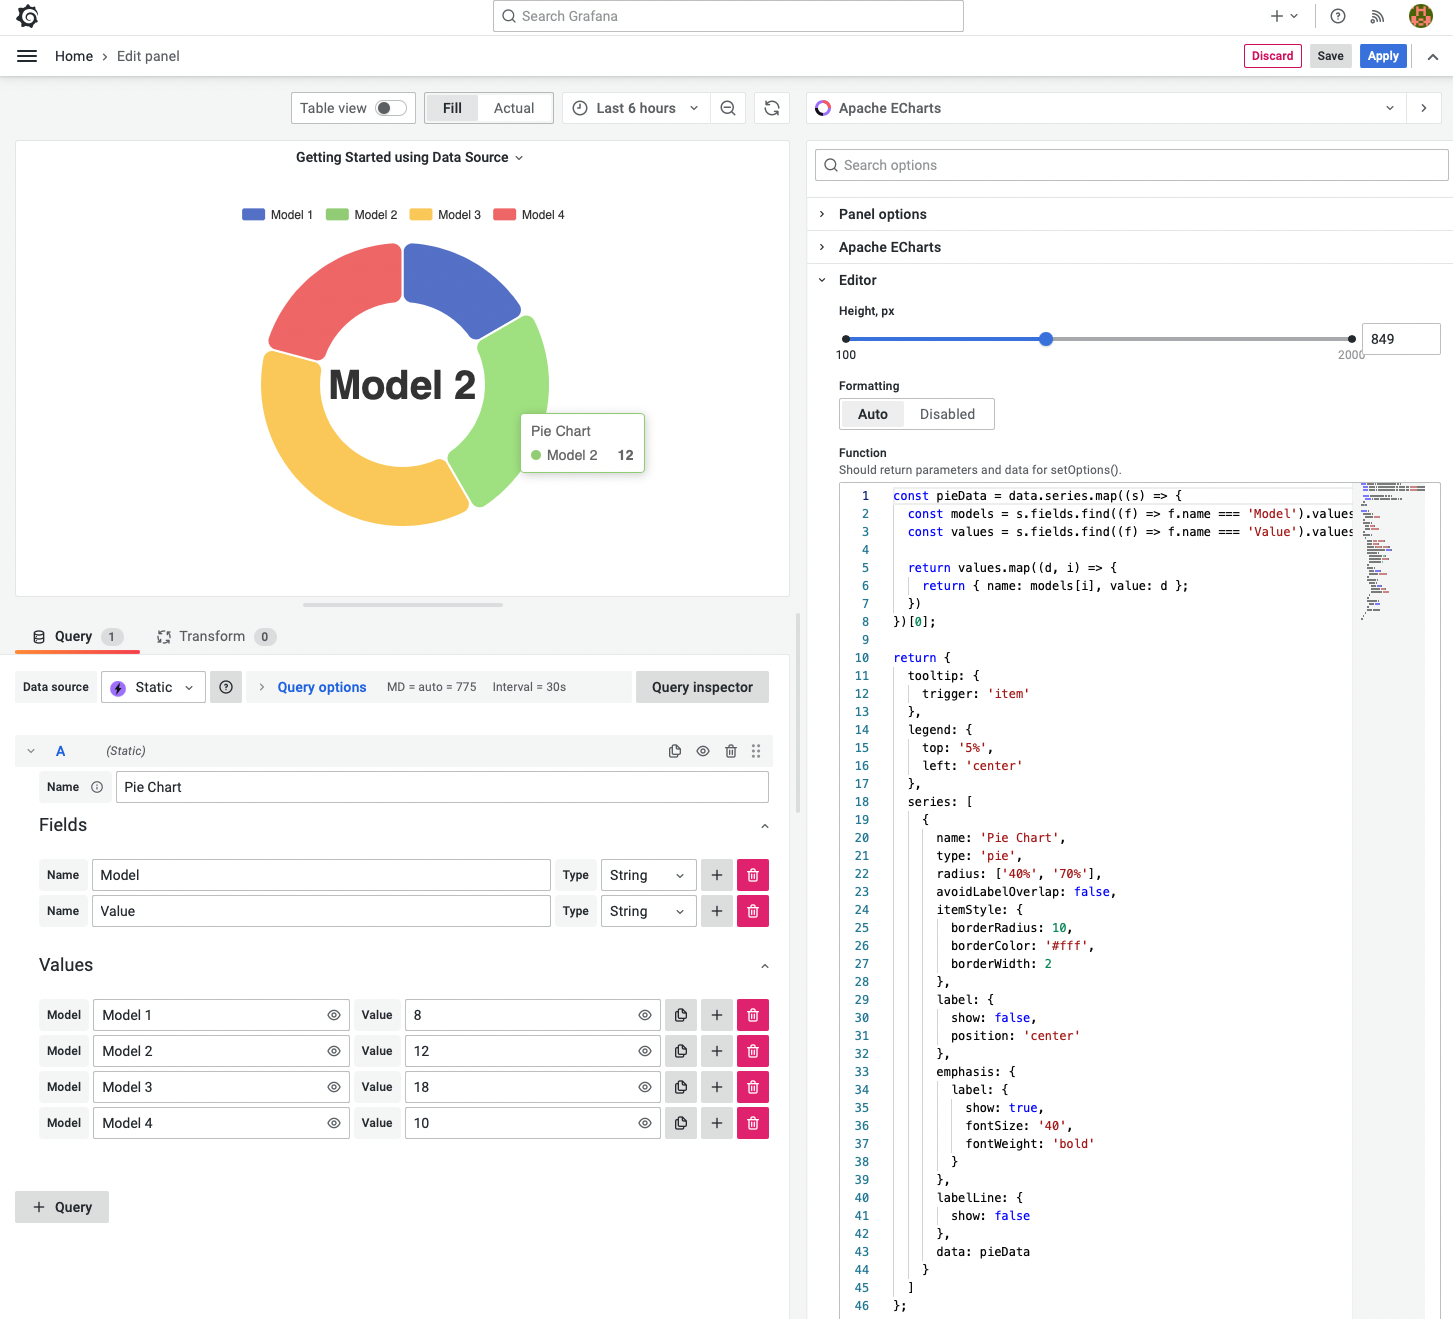 Apache ECharts visualizes Pie Chart from the Static Data Source.